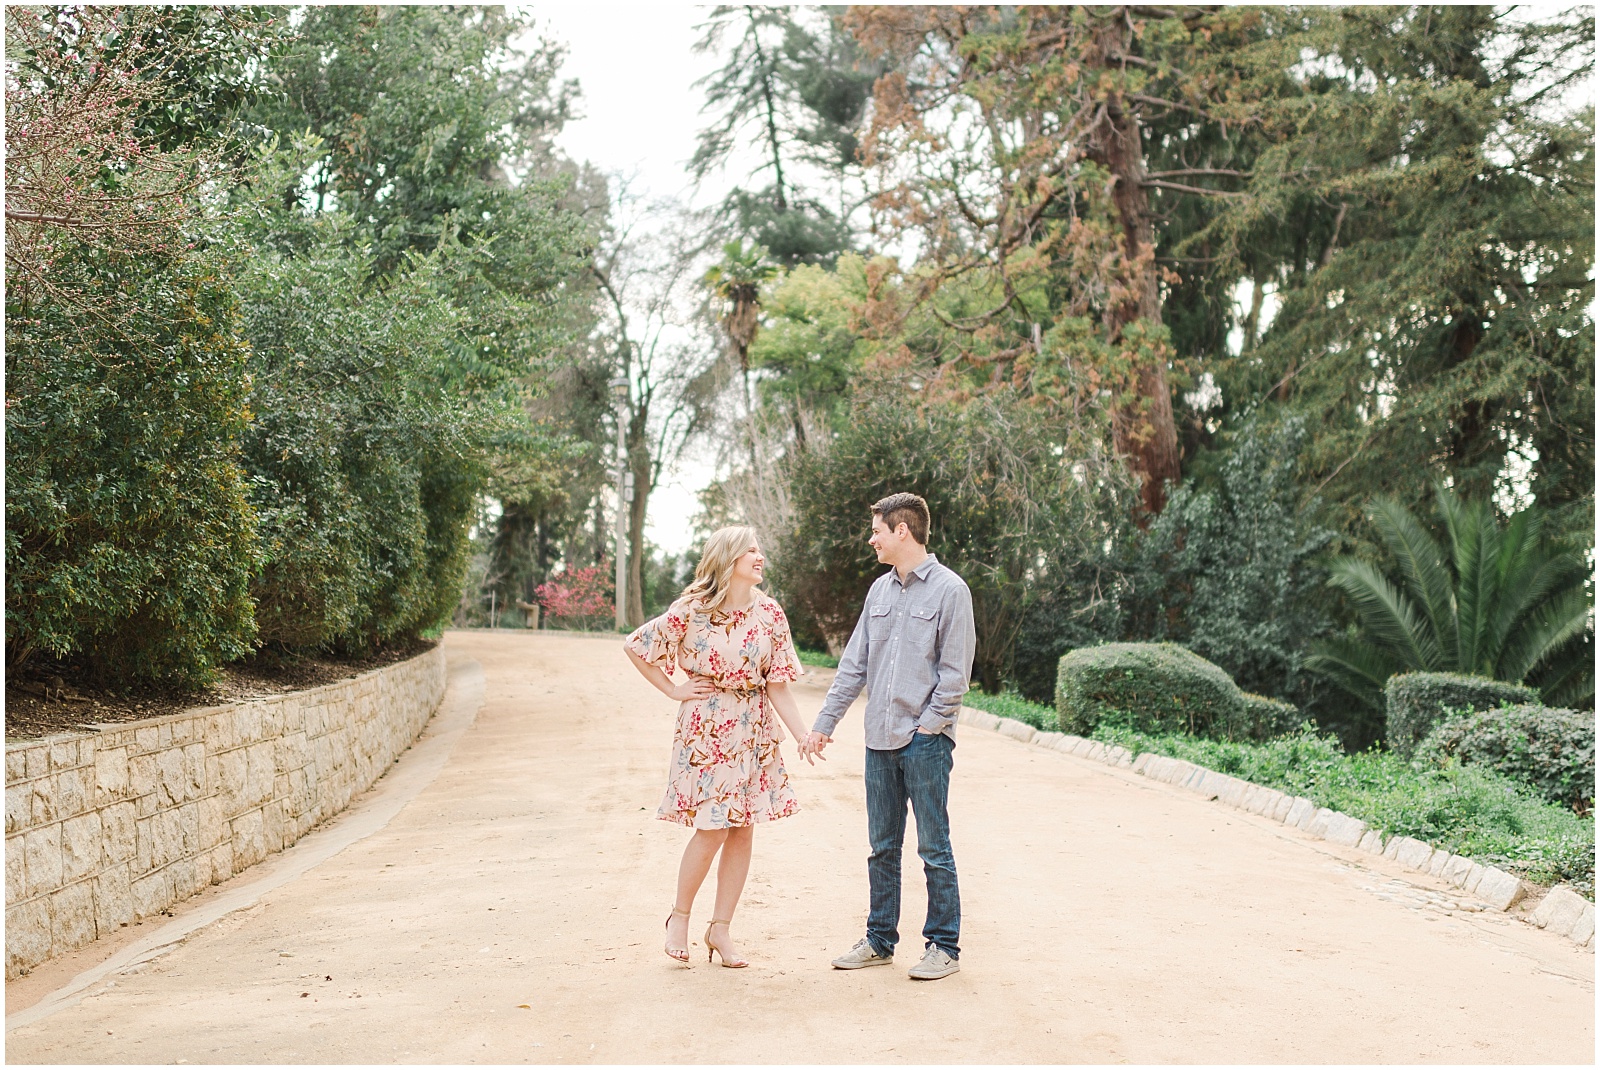 Redlands Engagement Session by Mollie Jane Photography.  To see more go to www.molliejanephotography.com